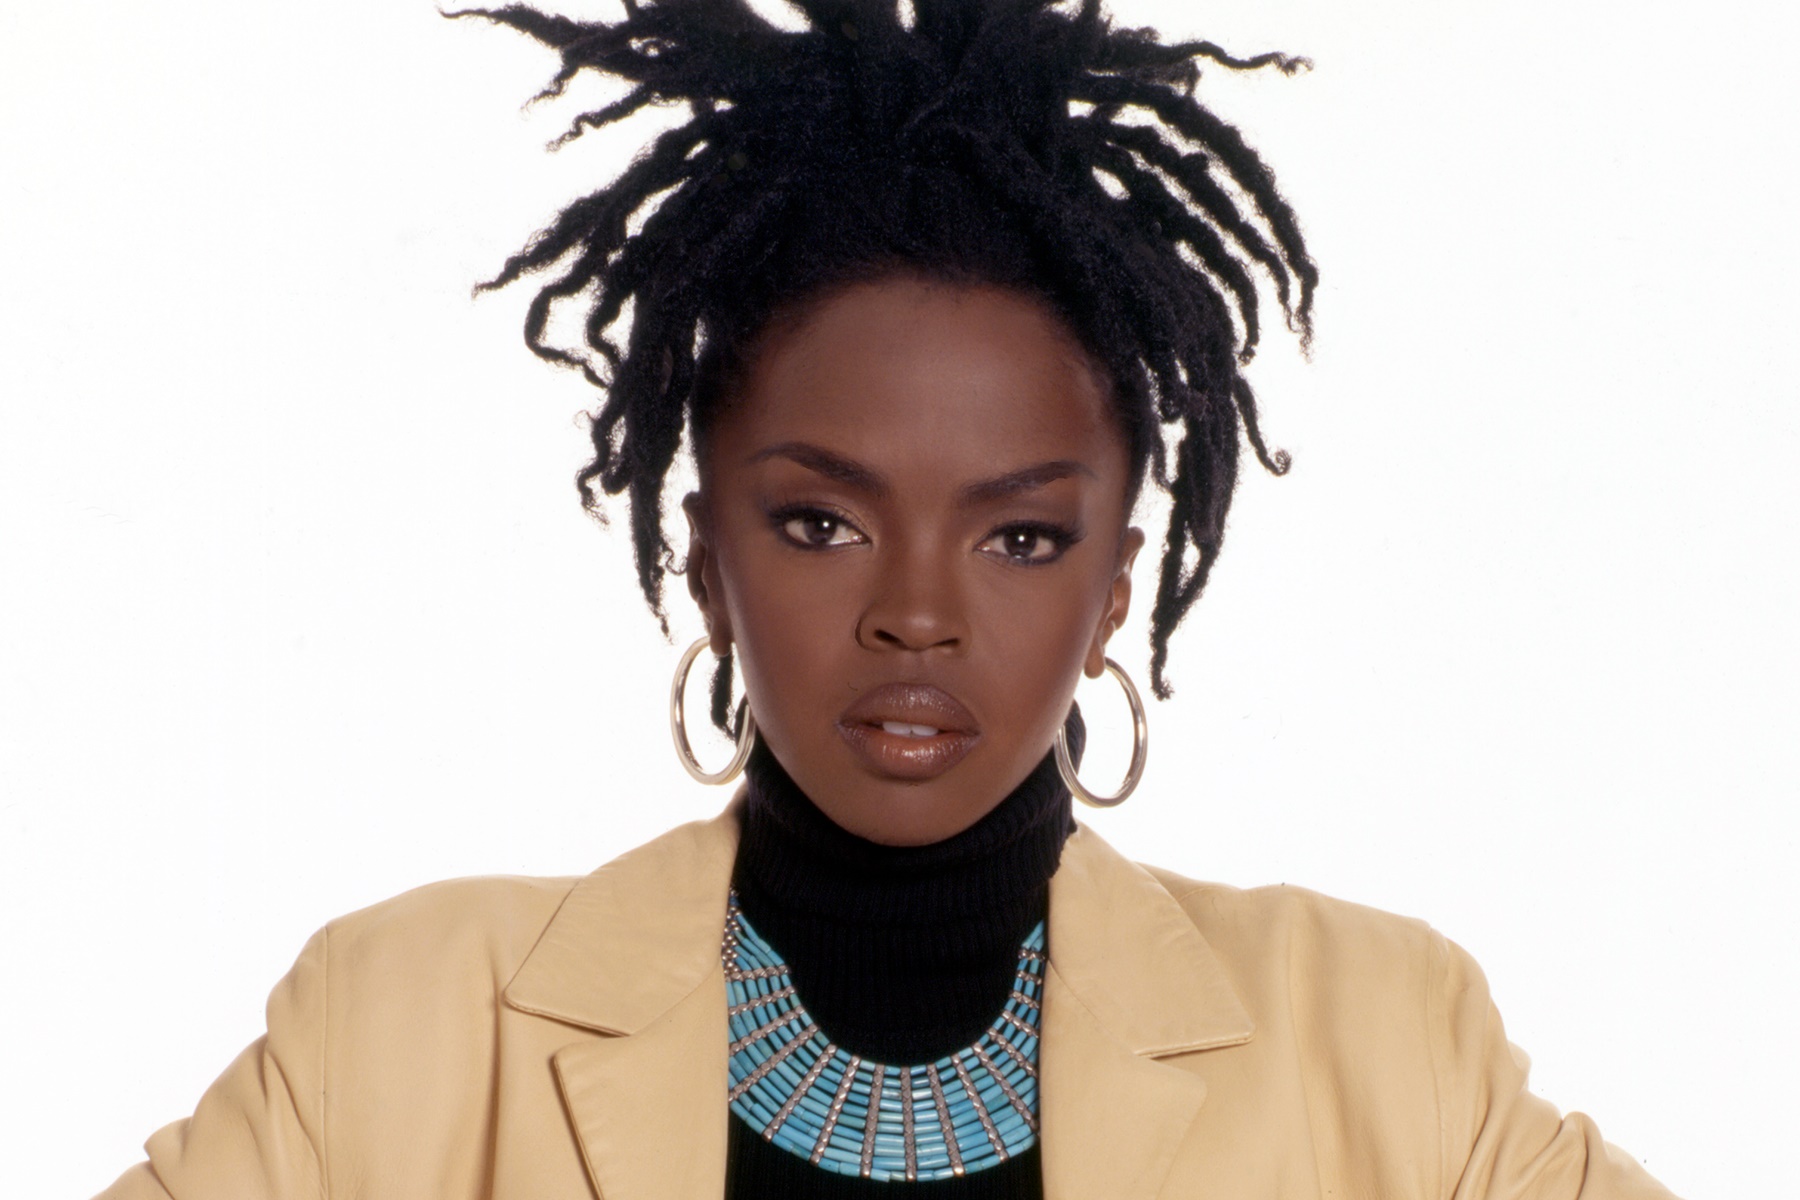 Lauryn Hill alive and kicking